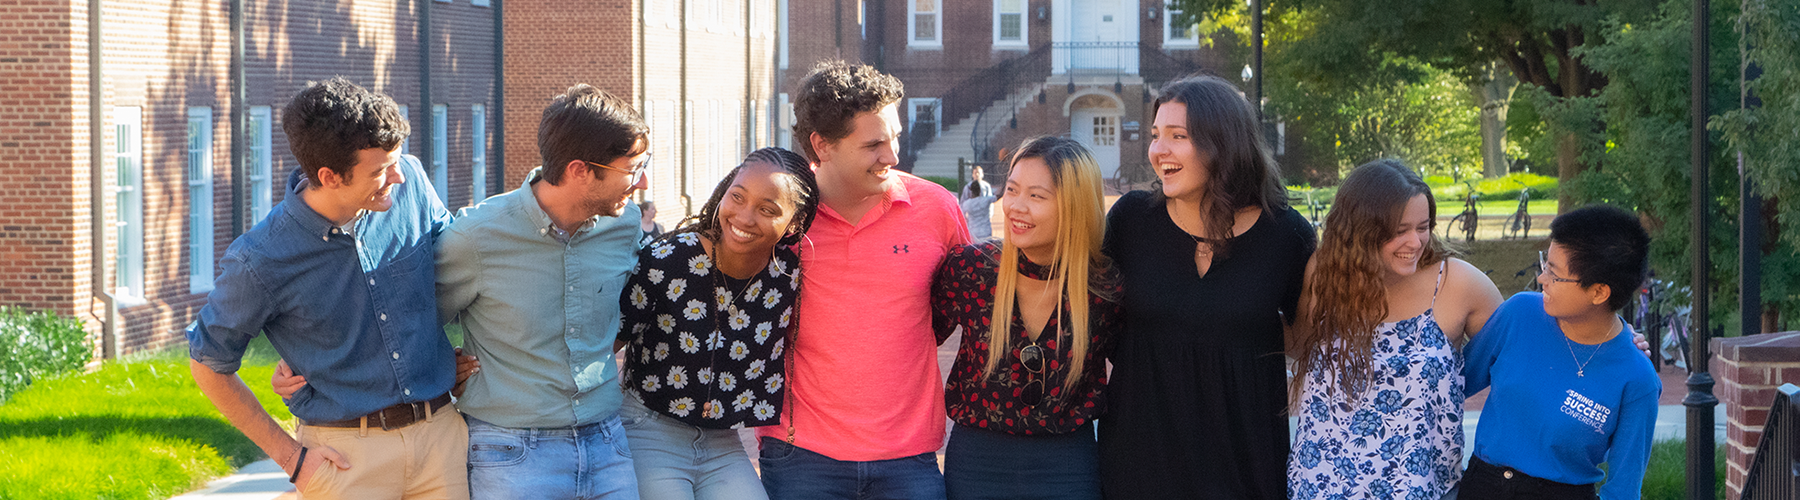 A group of diverse students with arms around their shoulders, laughing and smiling.